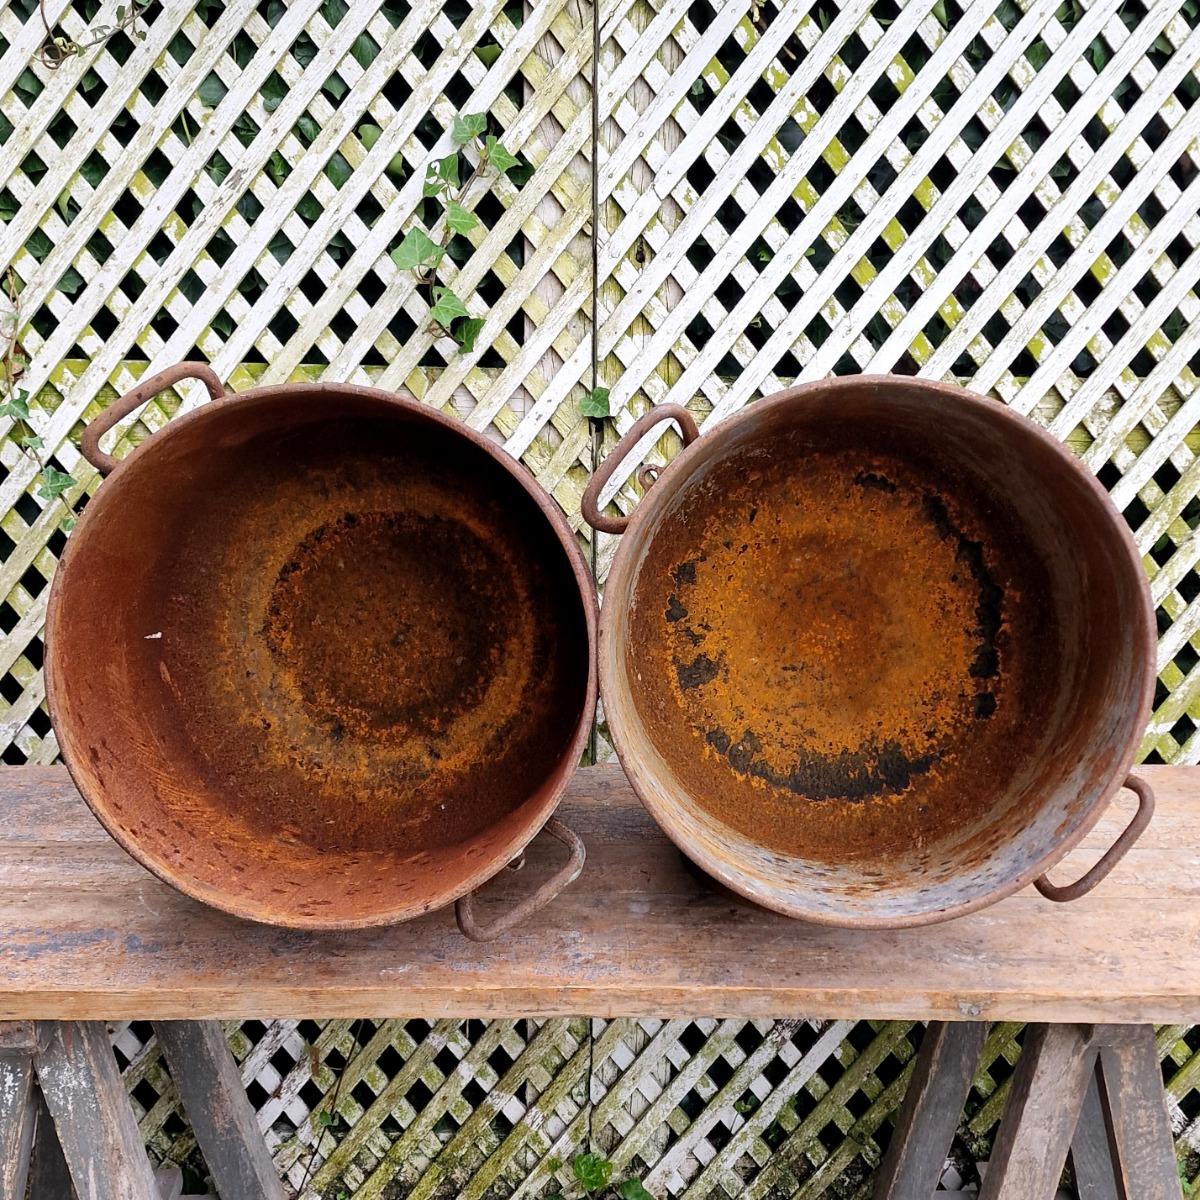 Pair of large metal containers